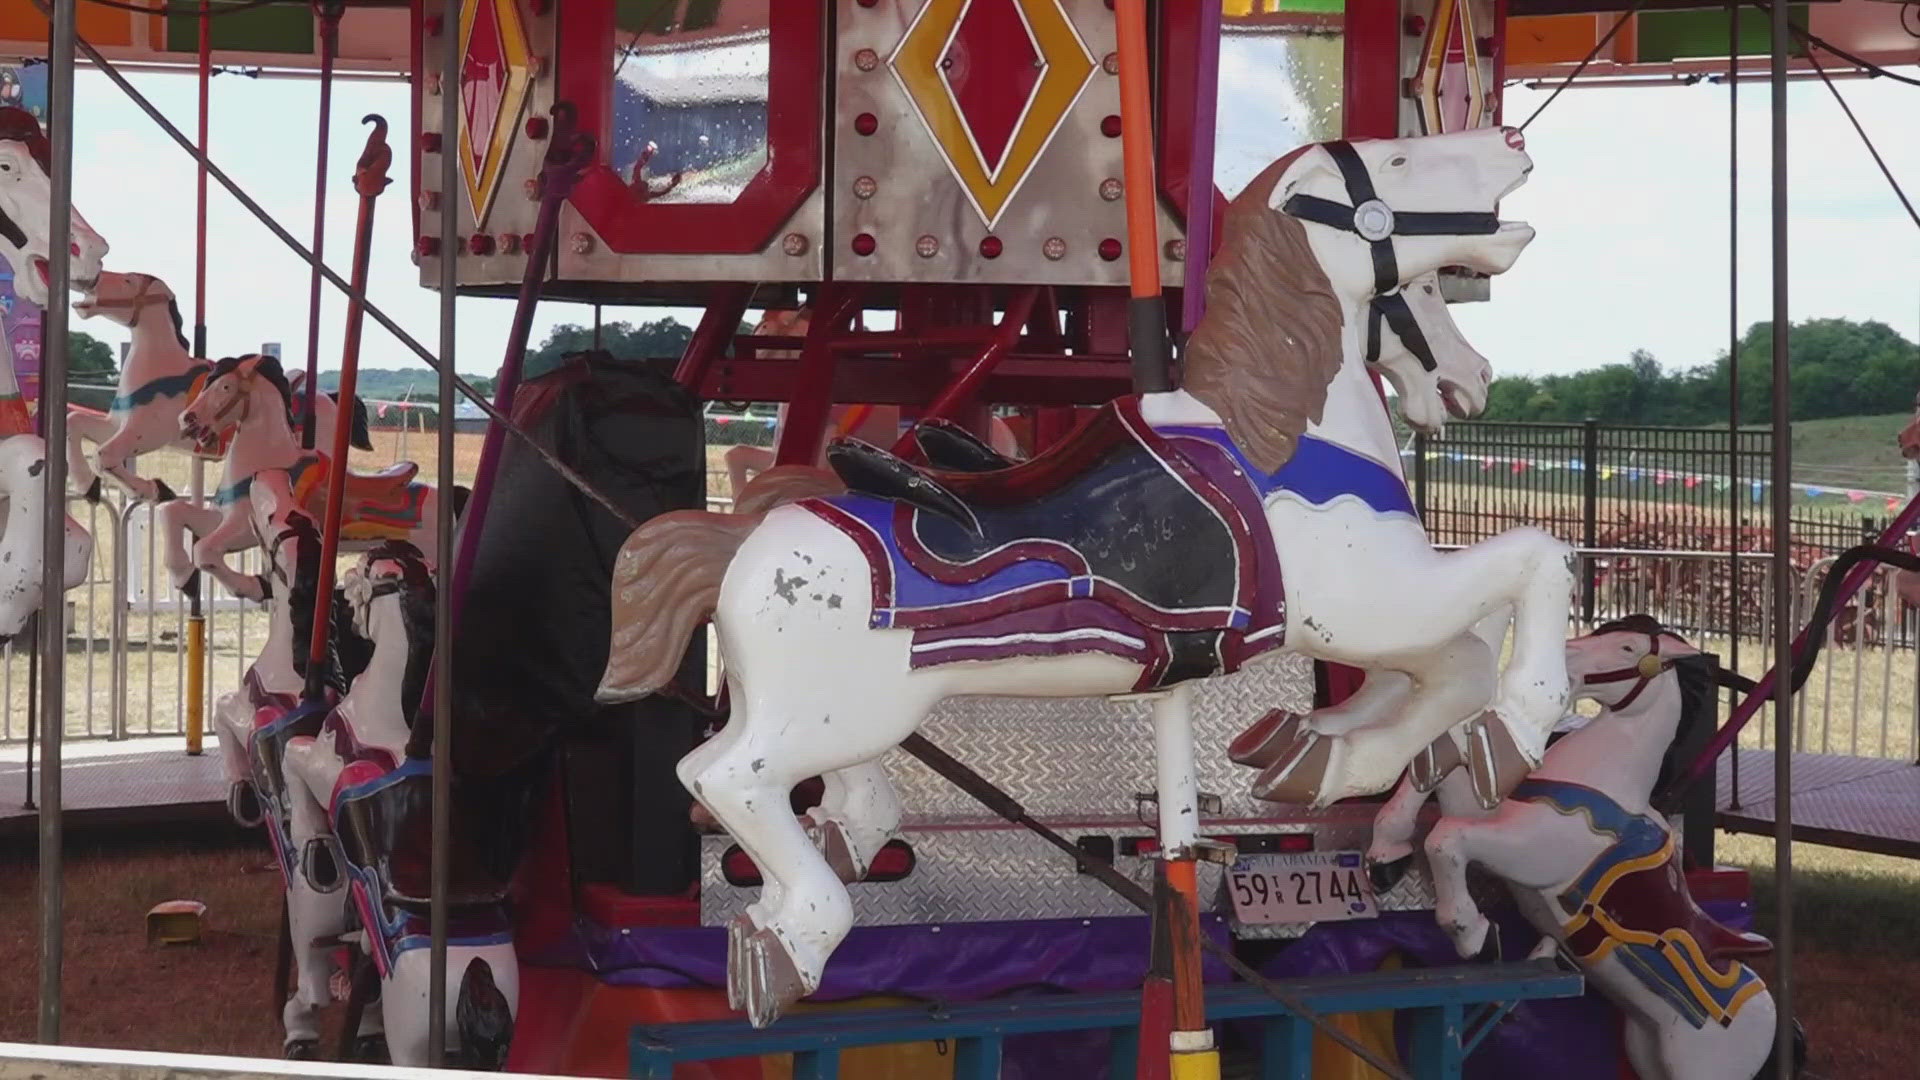 A video surfaced online of a carousel malfunctioning. It shows a mother and her son on a ride when the horse the child is on swings out.